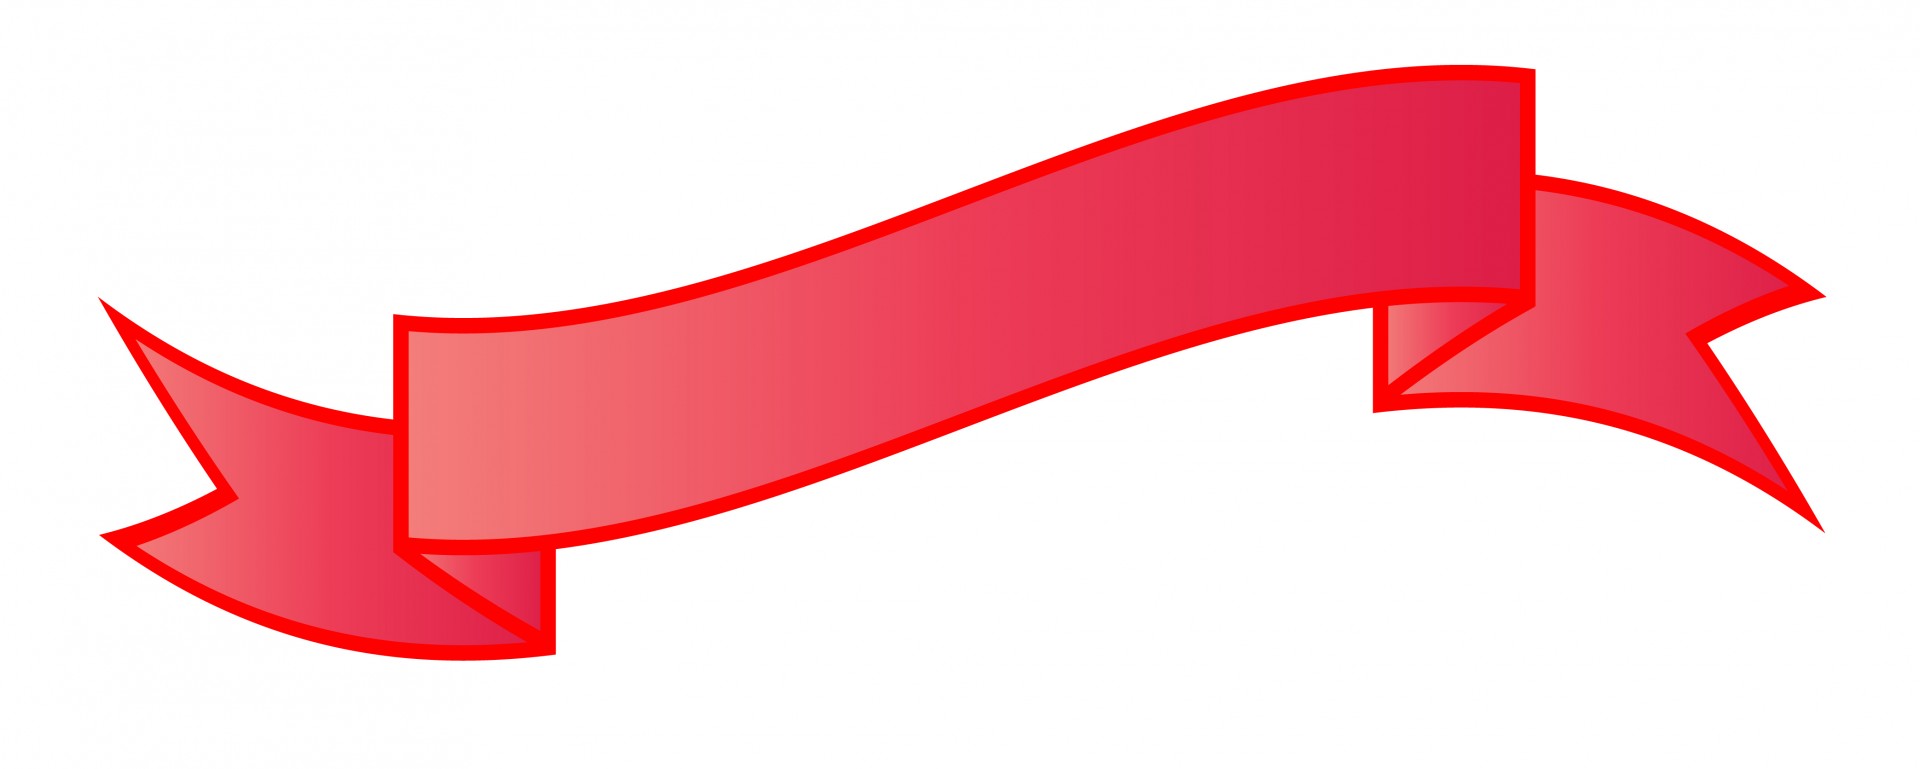 Red free stock photo. Banner clipart ribbon